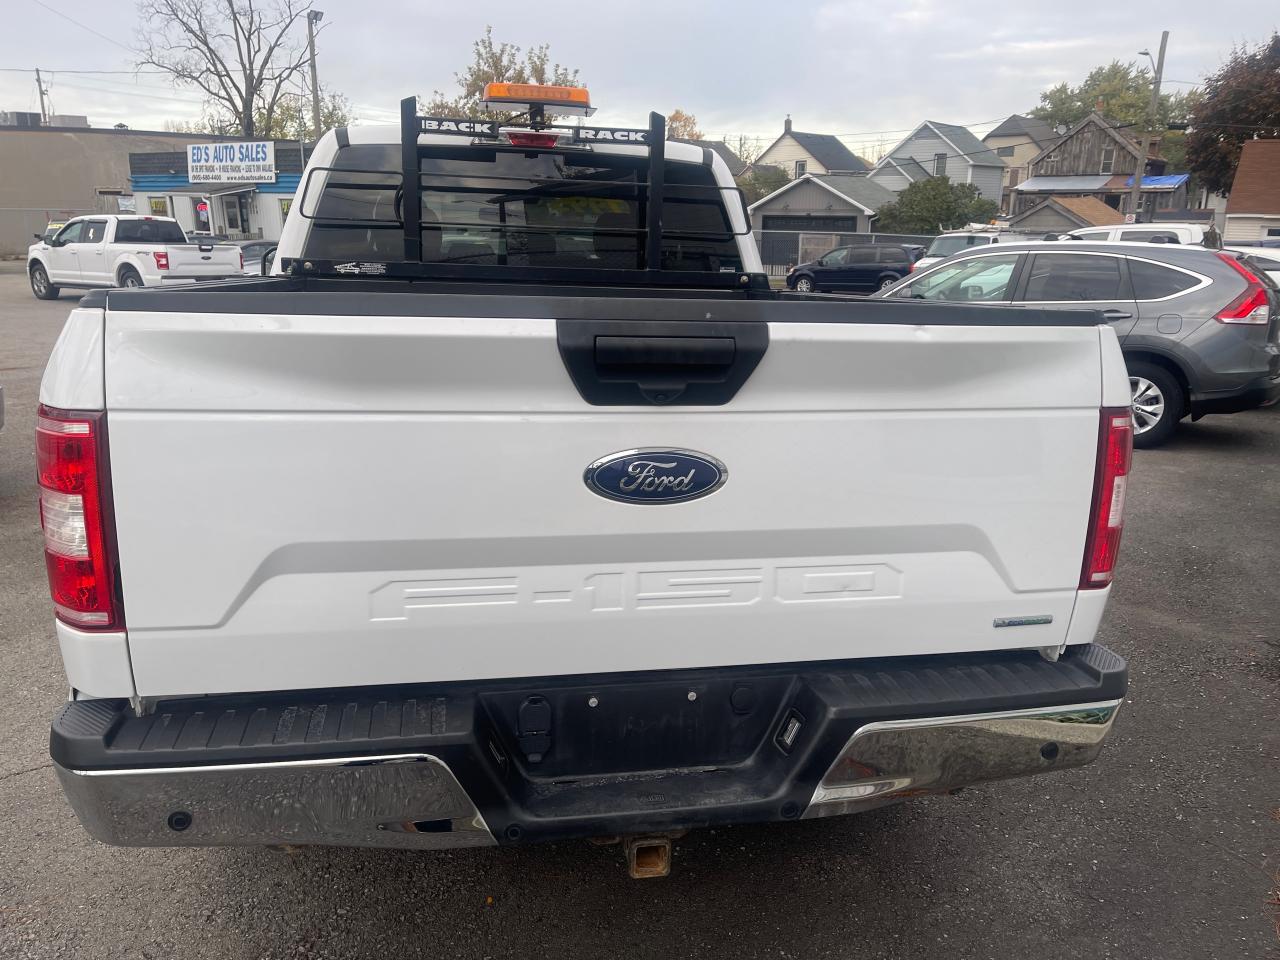 2020 Ford F-150 XLT, Ext. Cab. 4X4, P. Seat, Center console - Photo #6